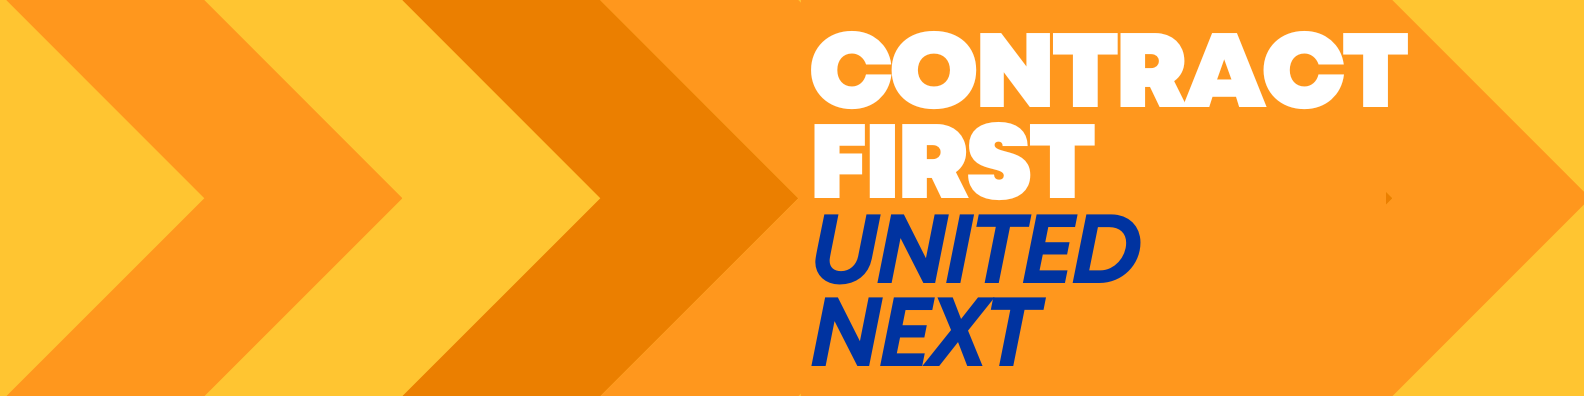 Contract FIrst United Next Linkedin banner